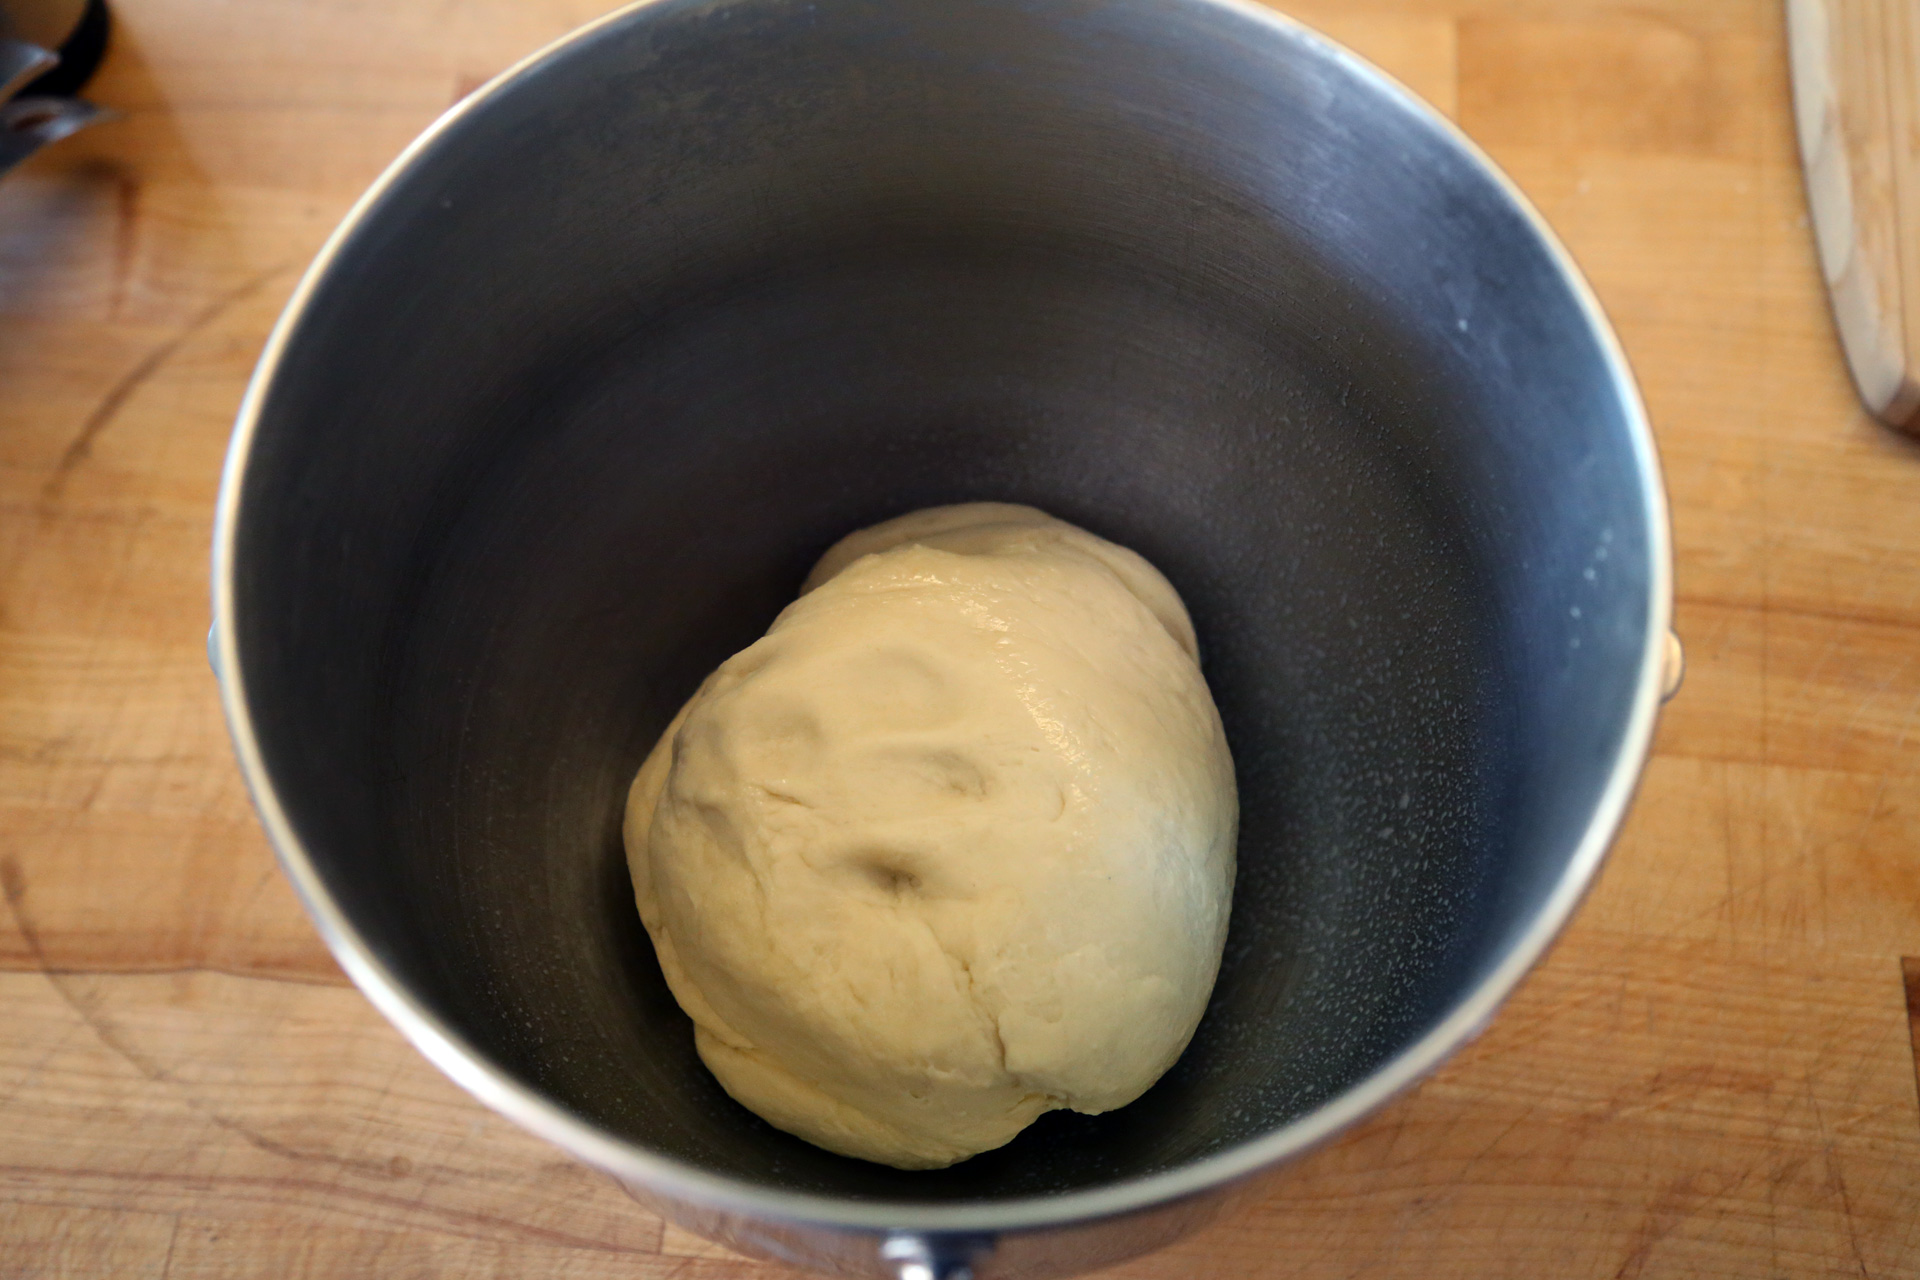 Remove the dough from the bowl, oil the bowl, then return the dough to the bowl.